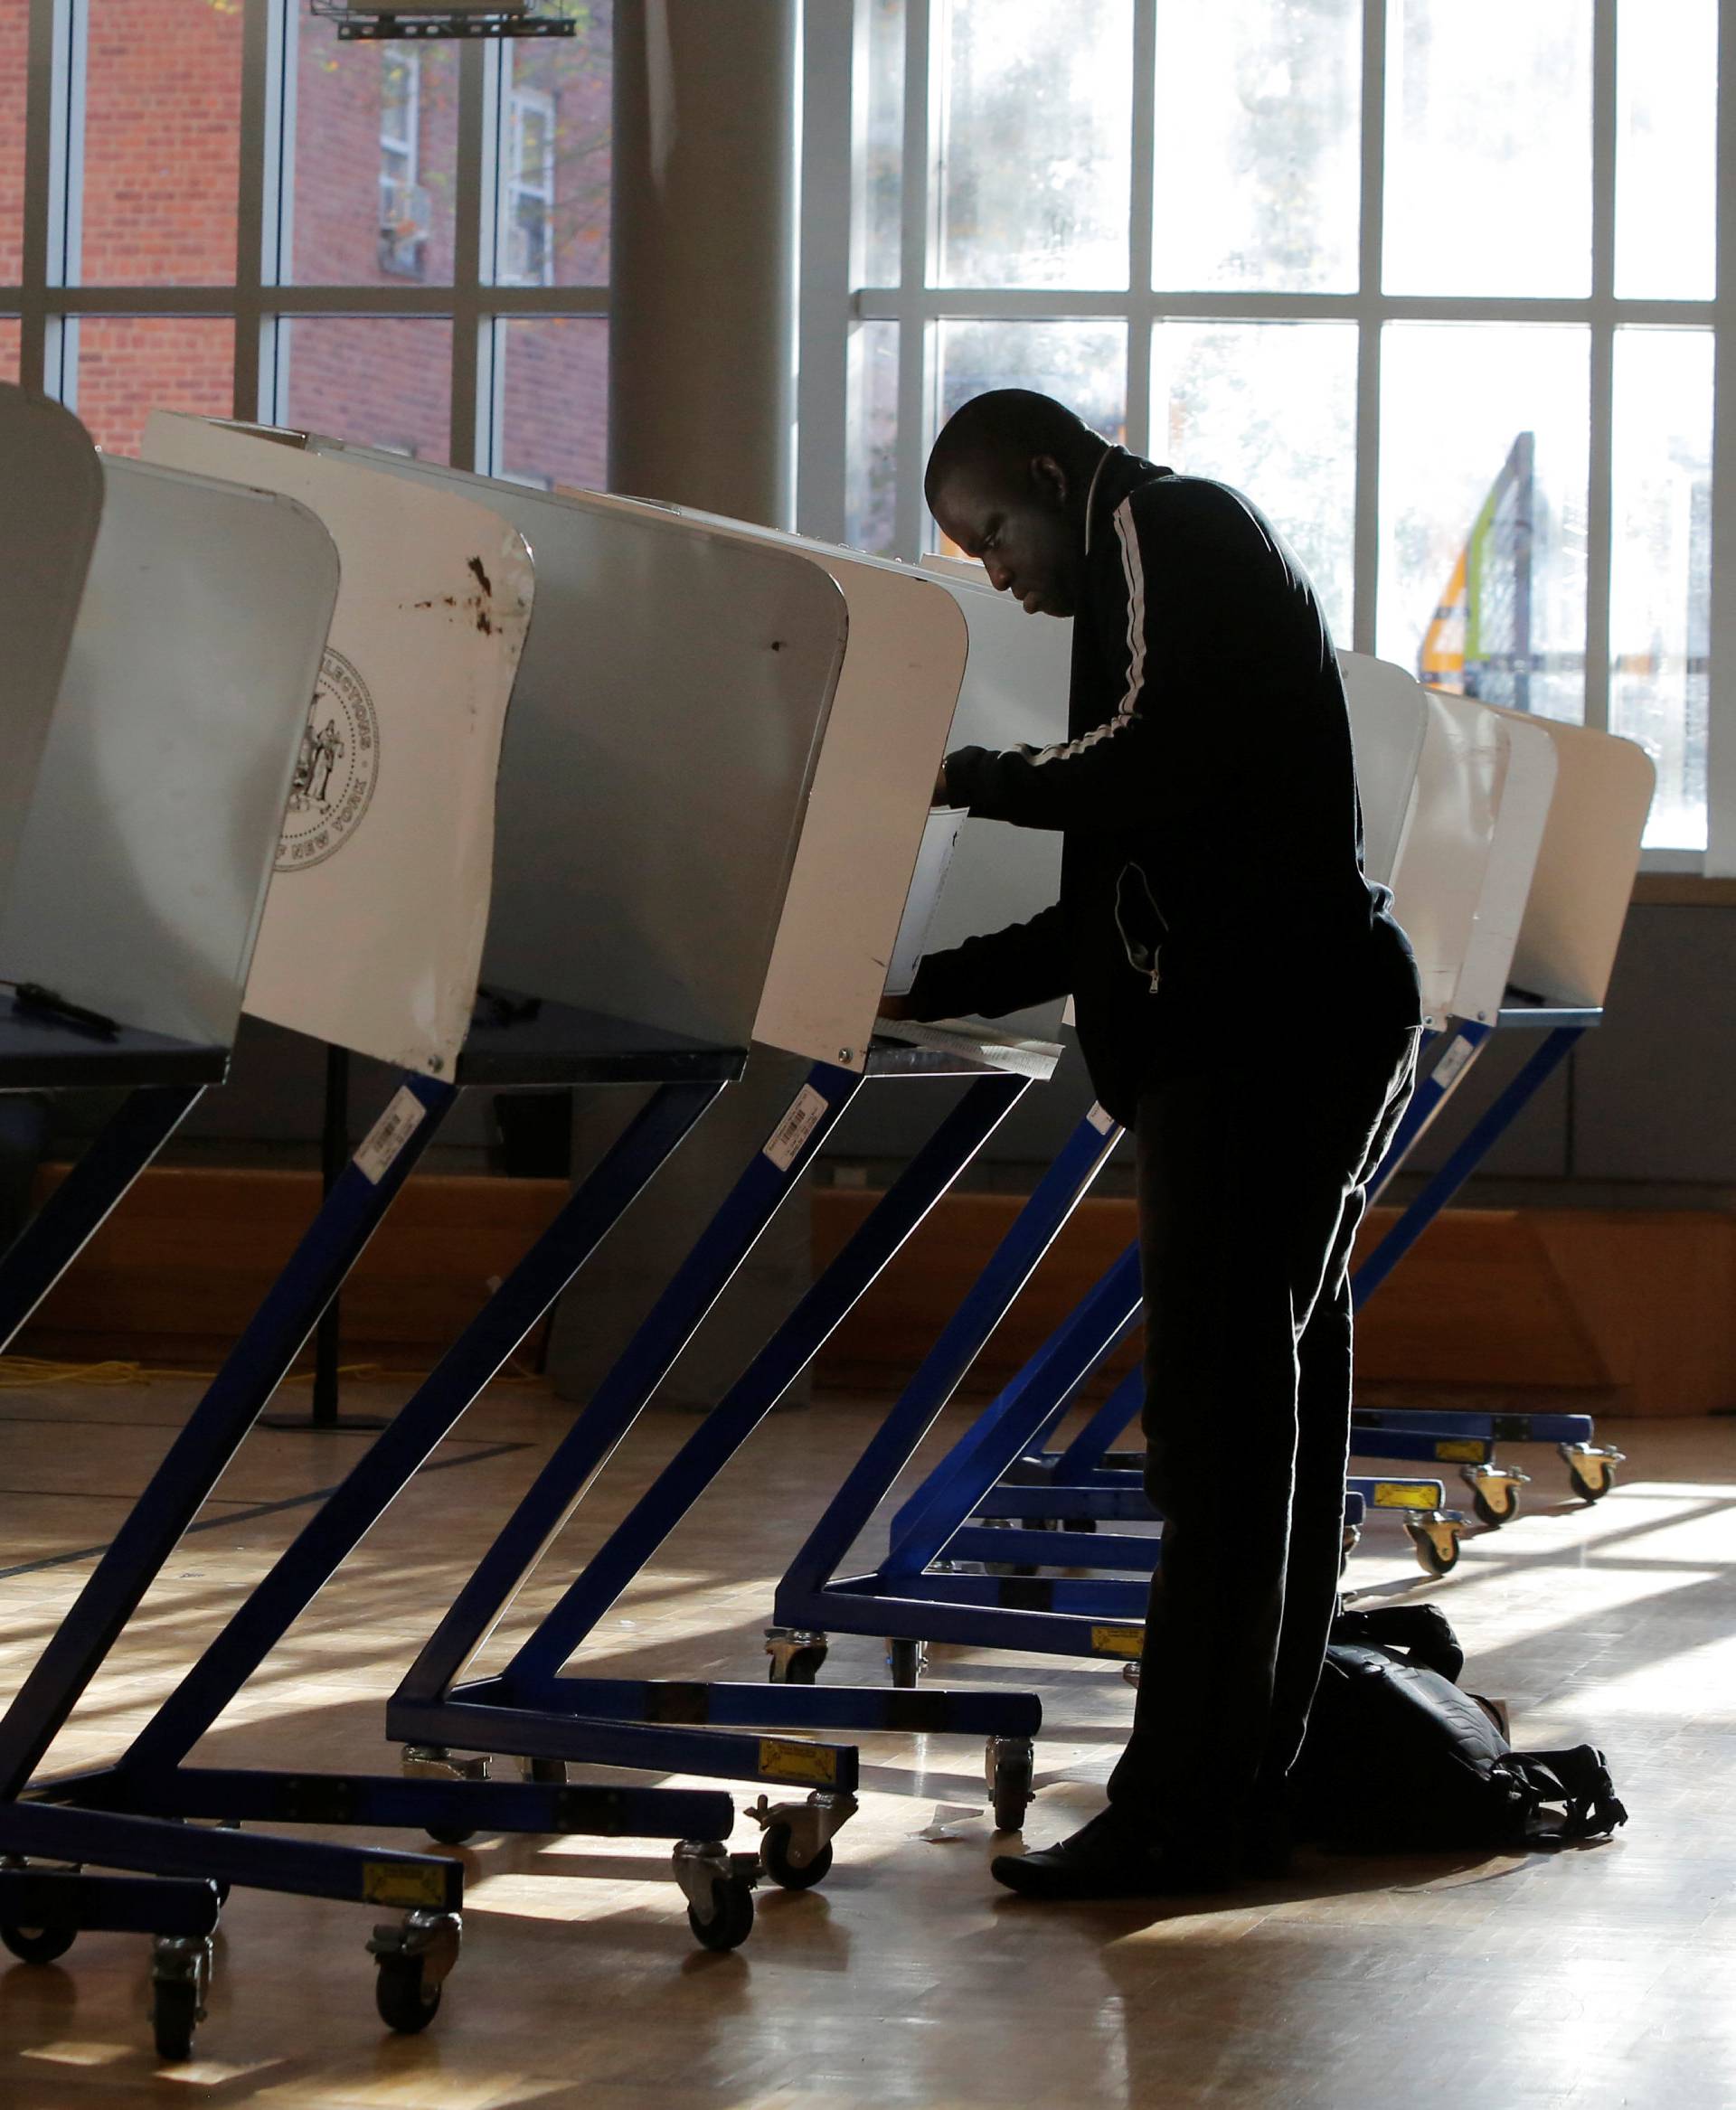 A man fills out a ballot for the U.S presidential election at the James Weldon Johnson Community Centre in the East Harlem neighbourhood of Manhattan, New York